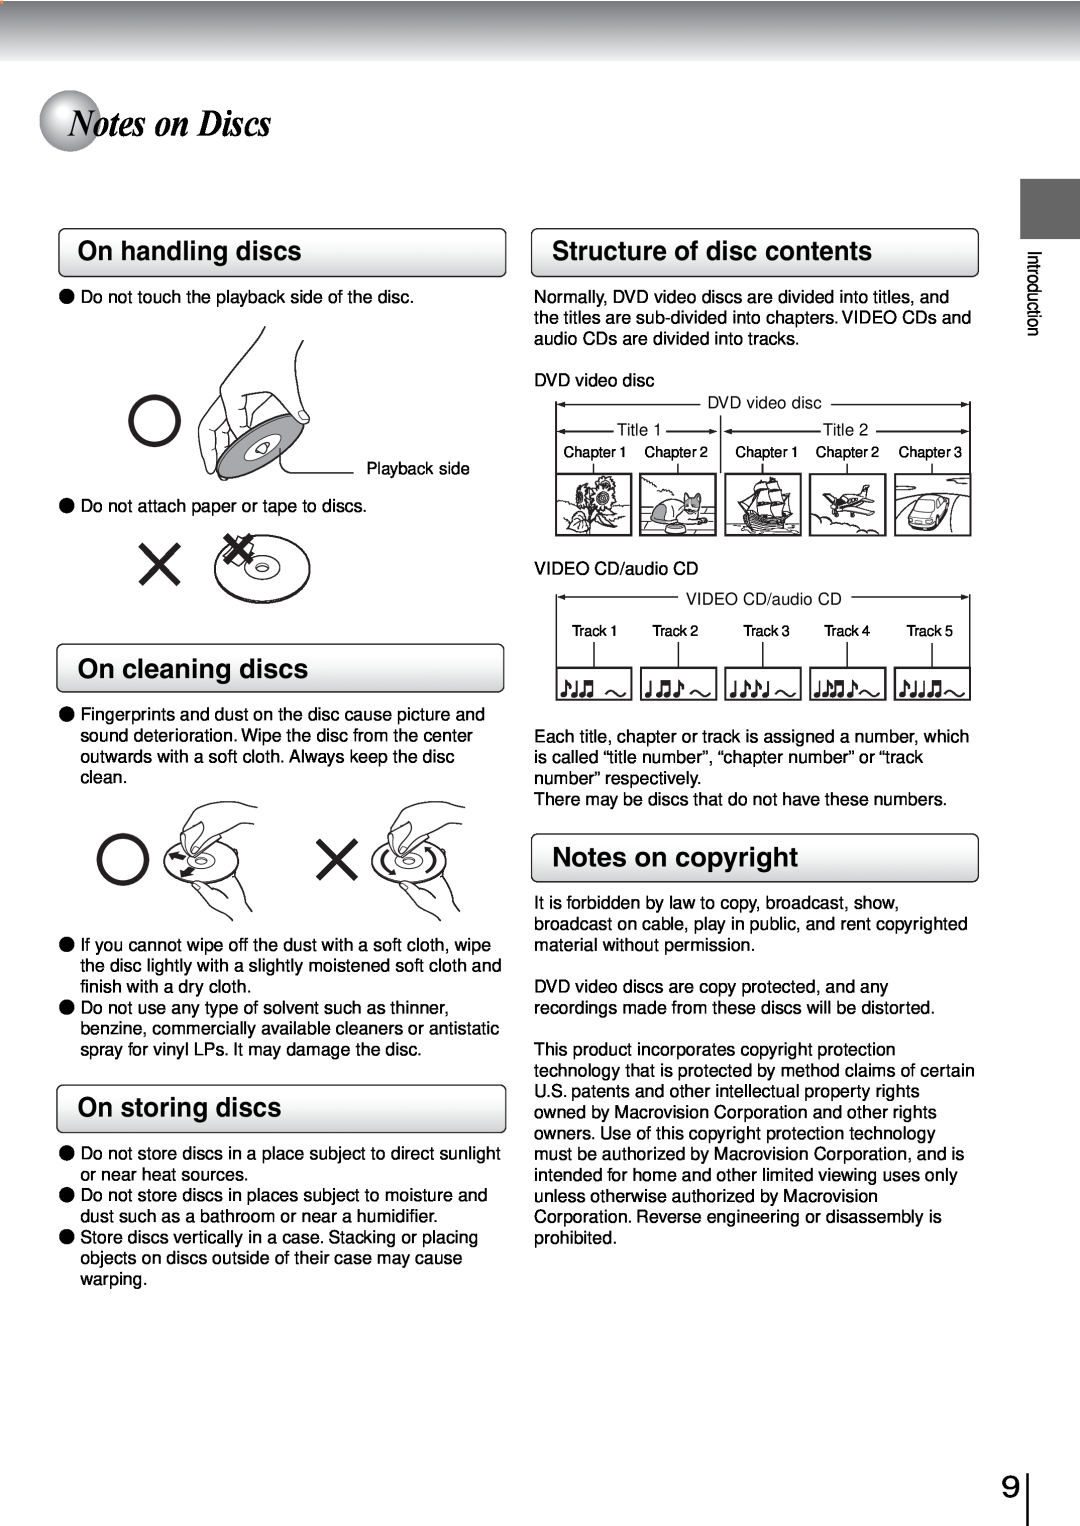 Toshiba SD-240ESE Notes on Discs, On handling discs, On cleaning discs, Structure of disc contents, Notes on copyright 